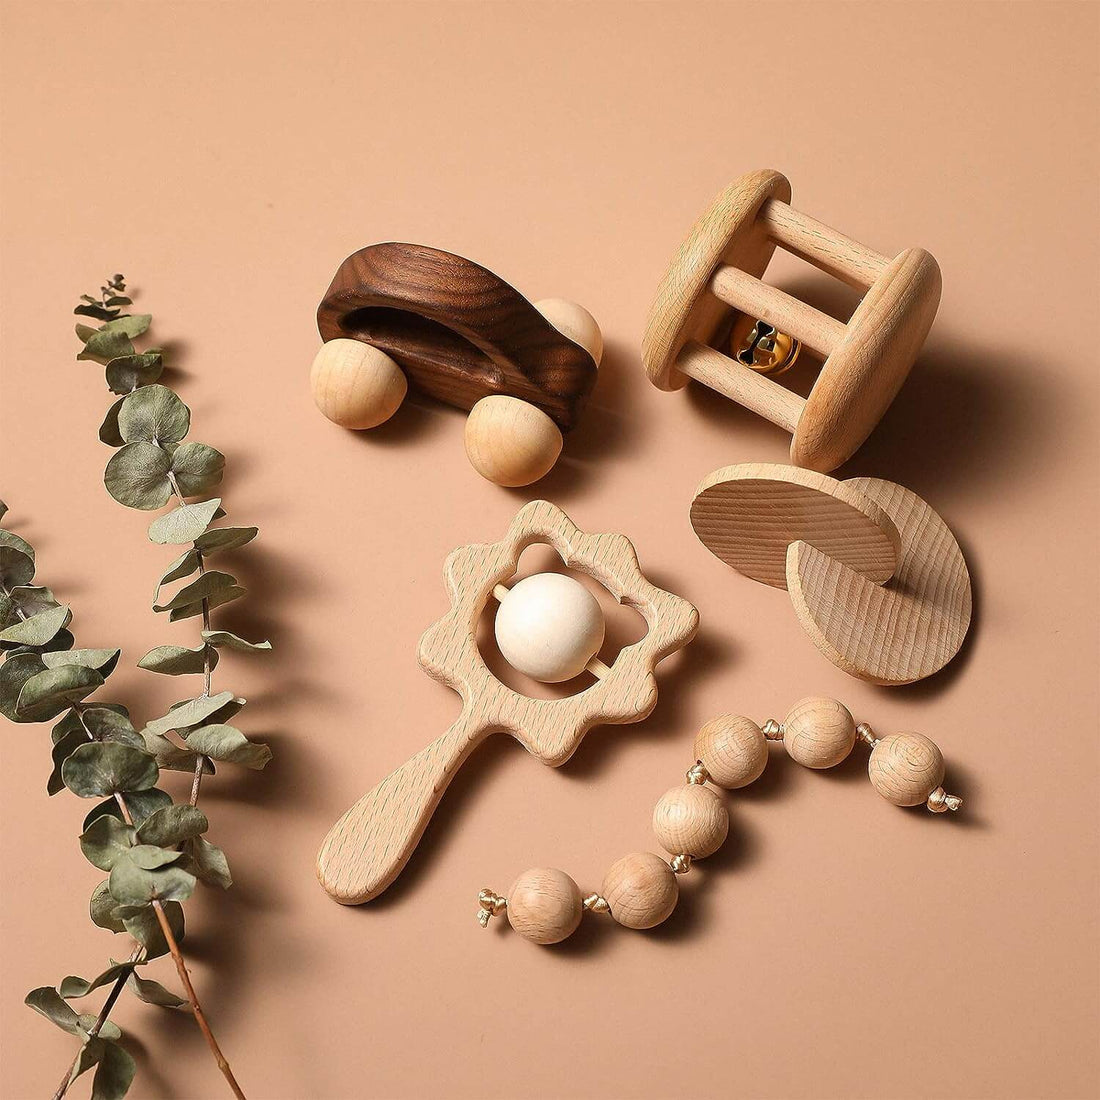 Heirloom Quality Wooden Baby Toys, Rattles and Teethers